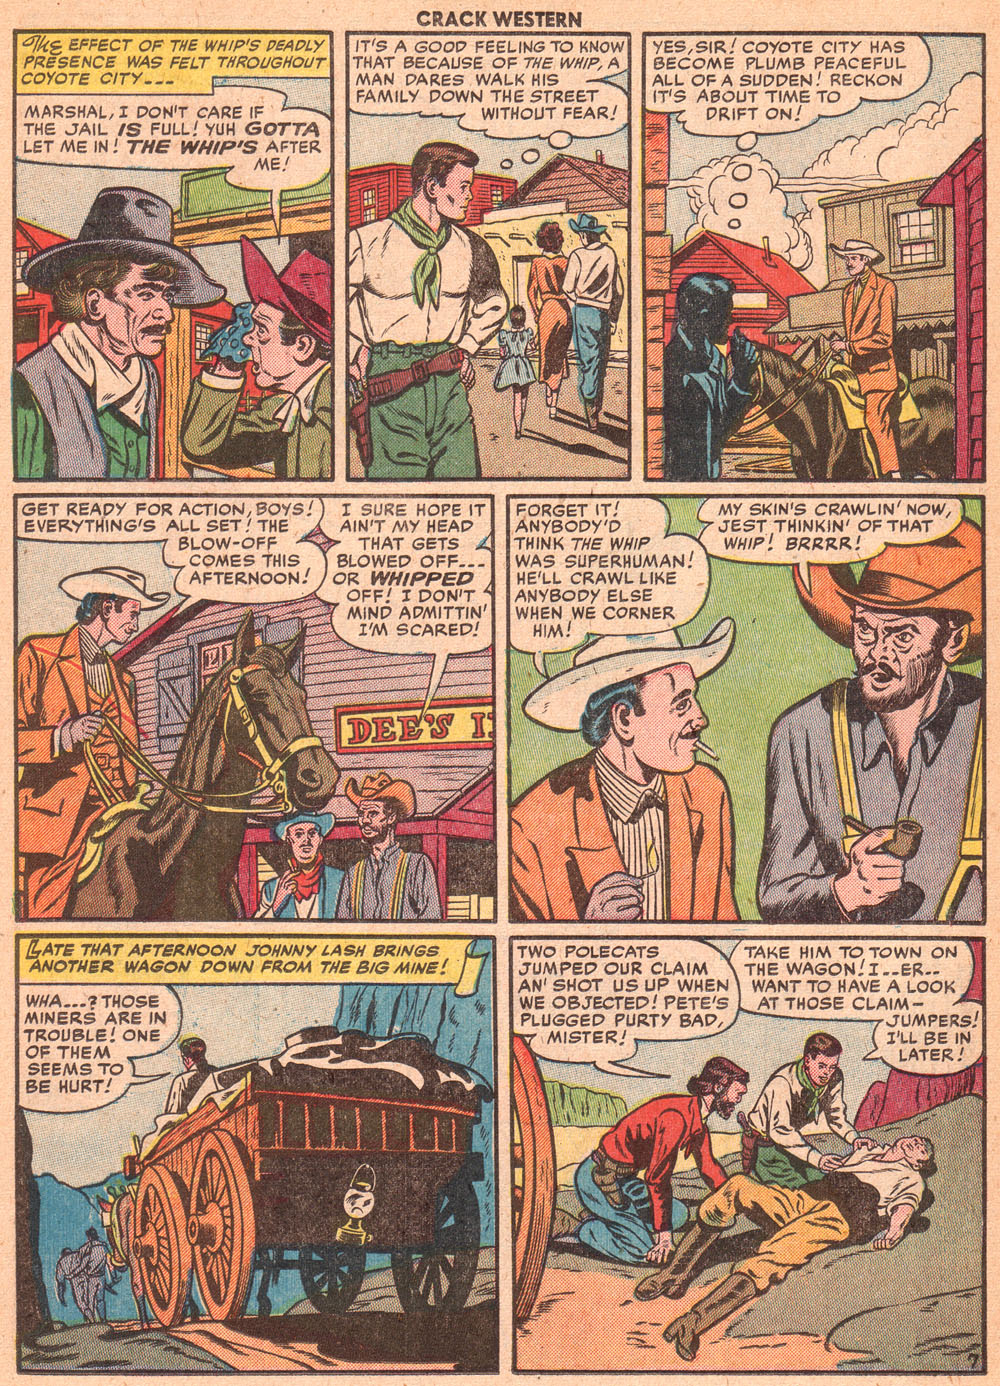 Read online Crack Western comic -  Issue #72 - 22